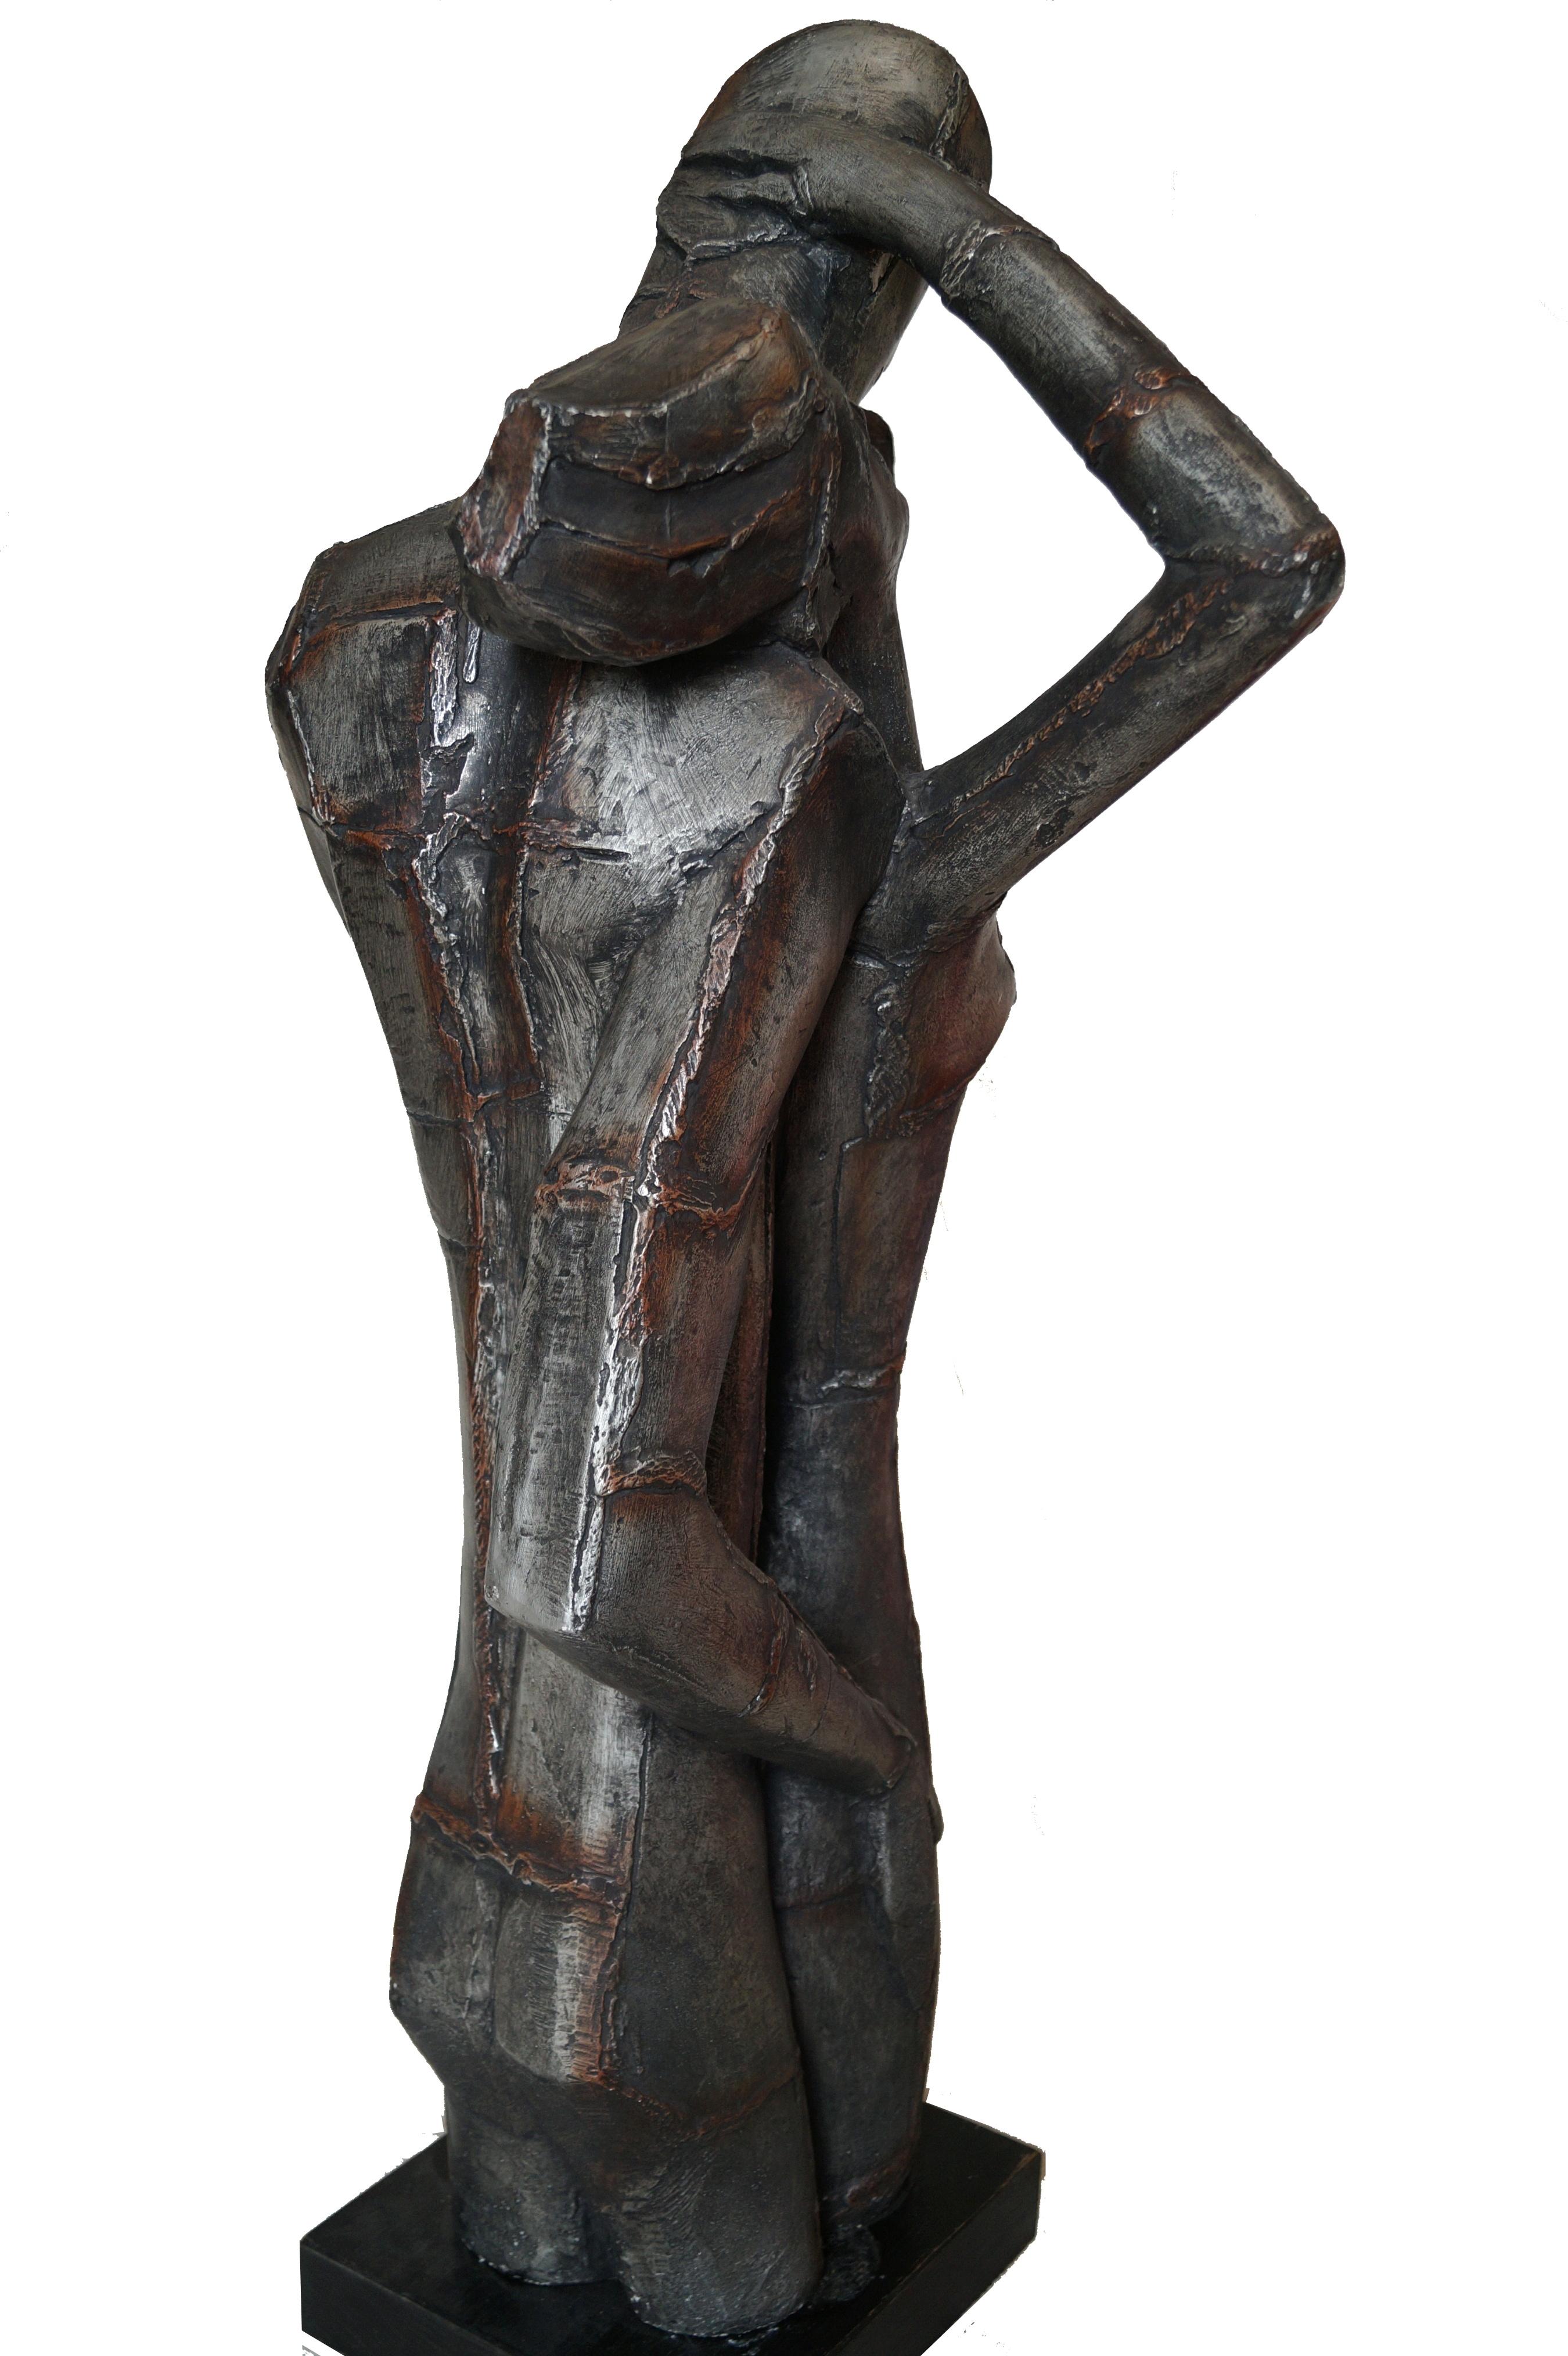 Austin Production Brutalist Large Sculpture Lovers Man Woman Mid Century Modern In Good Condition For Sale In Wayne, NJ